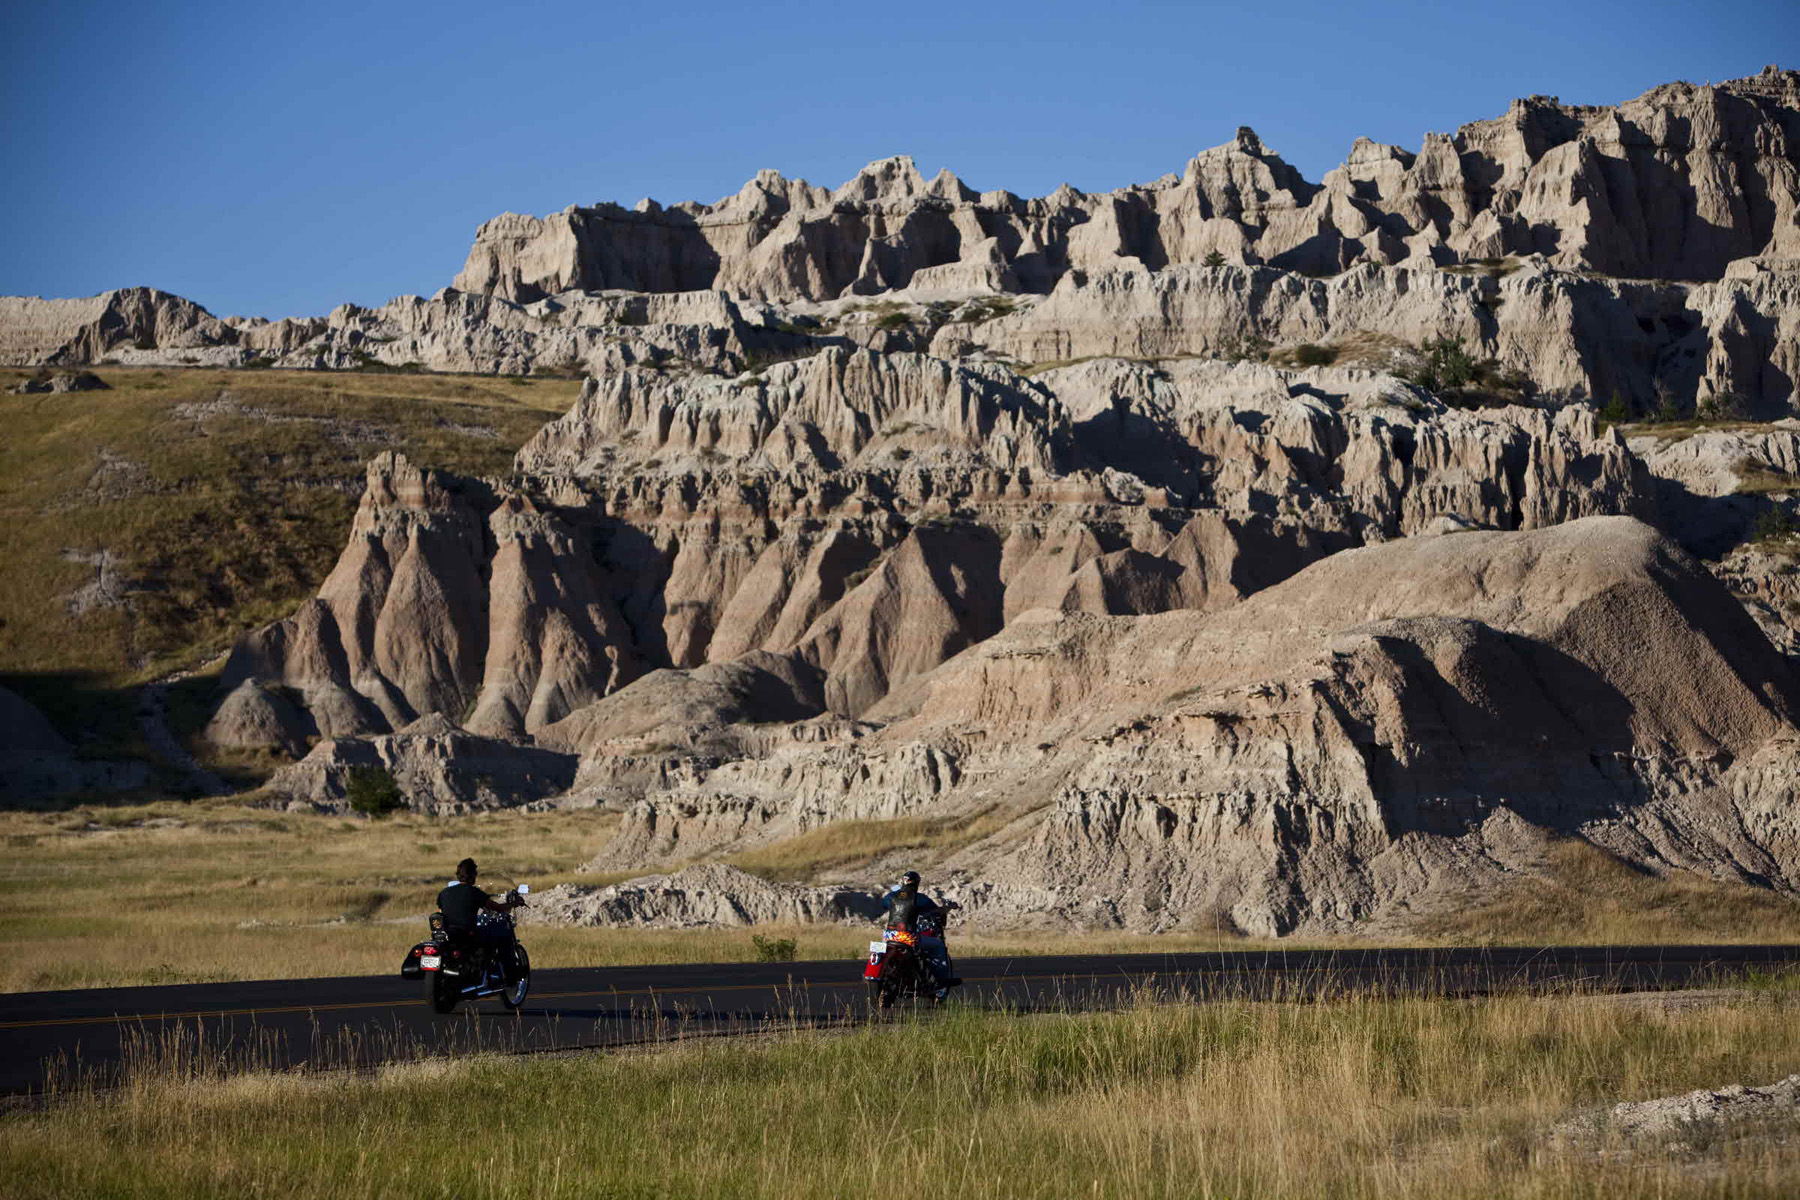 2010 sturgis motorcycle rally, Badlands National Park